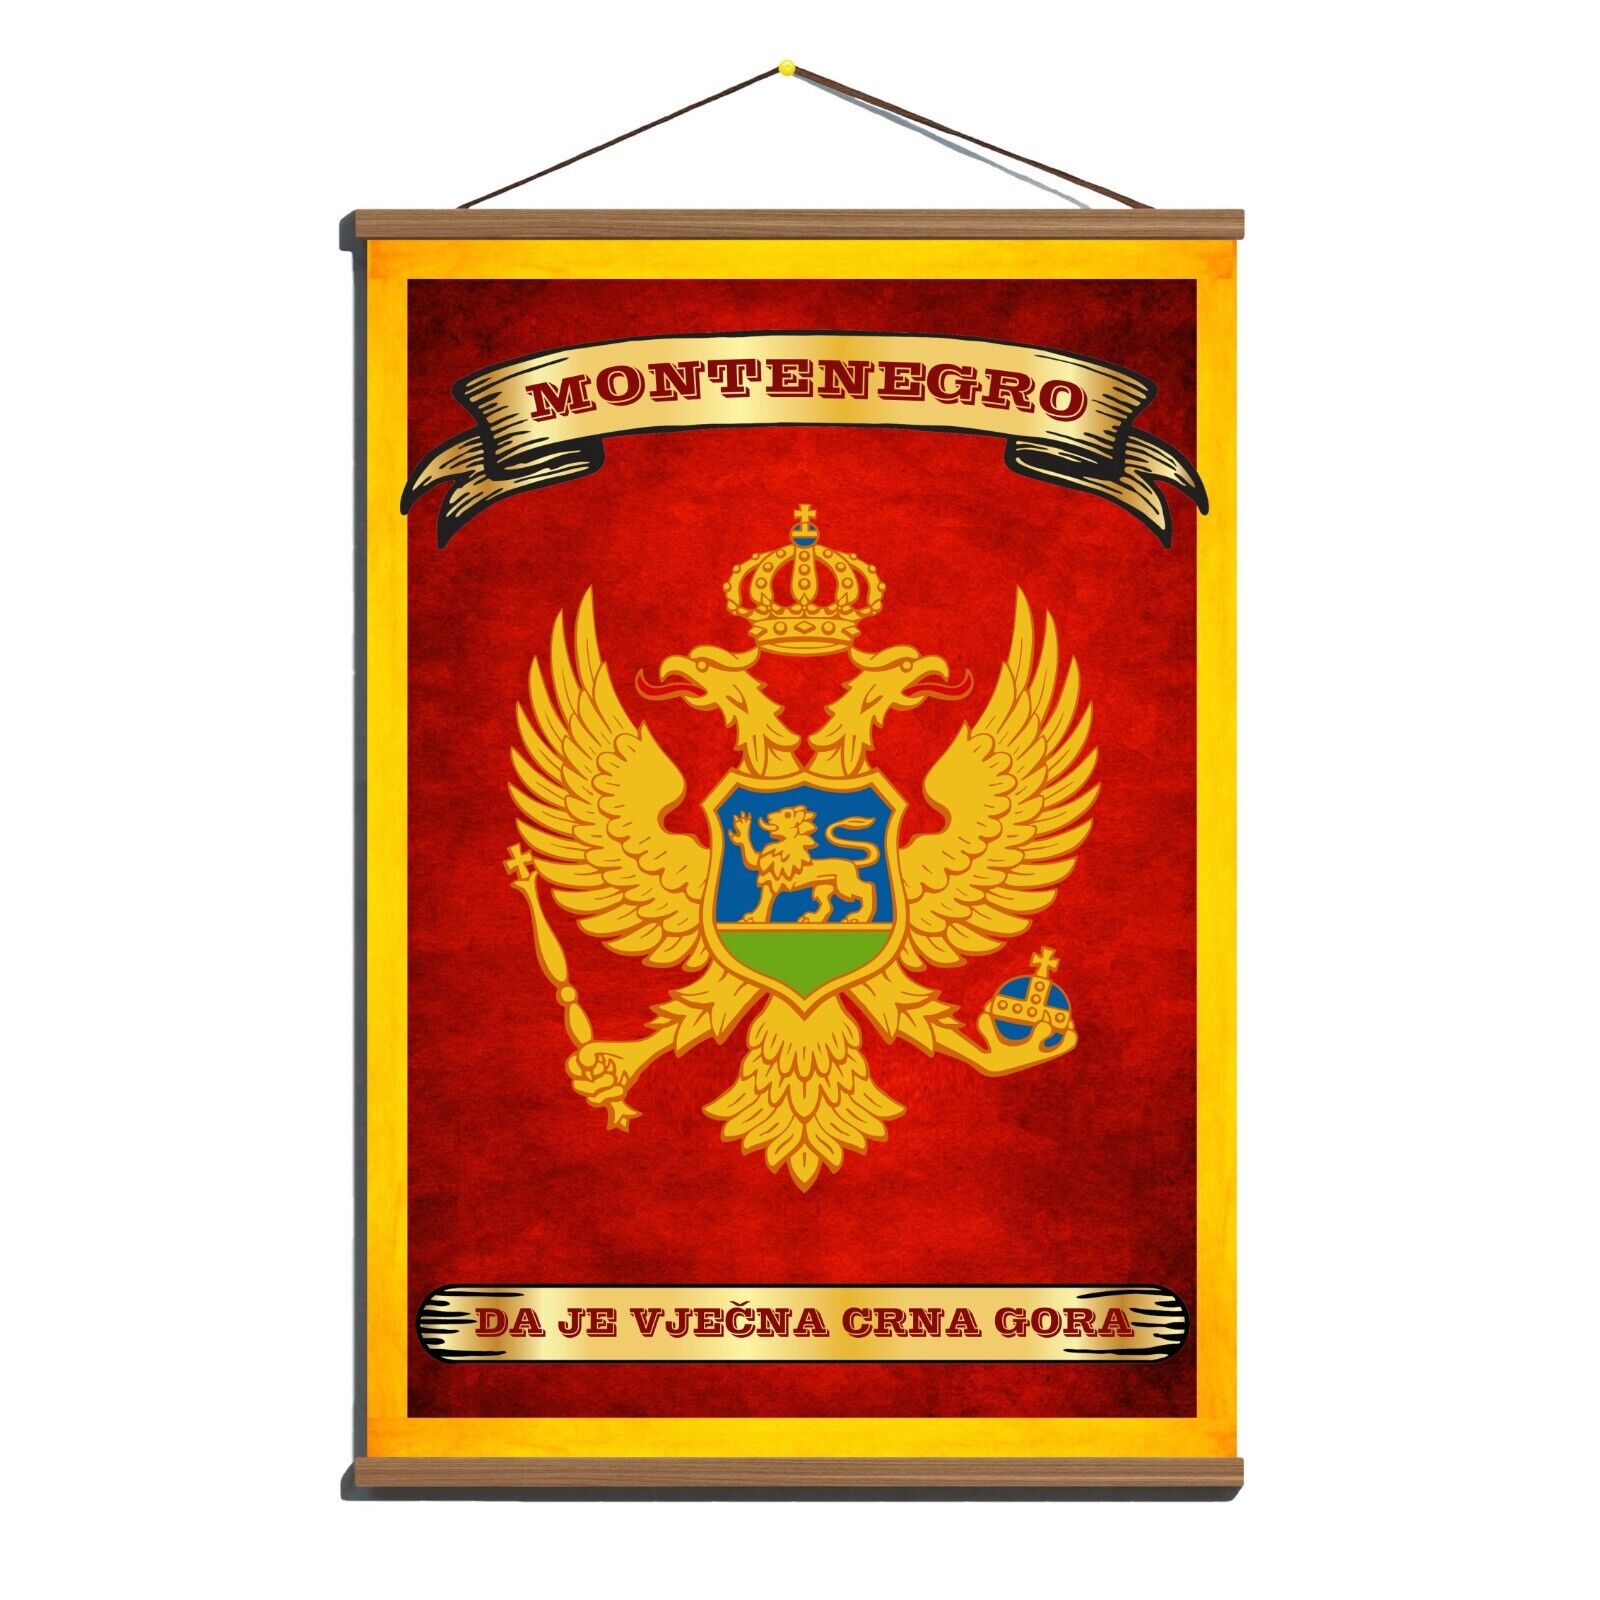 Montenegro Decorative Flag W/ Coat Of Arms, Motto; Canvas Magnetic Wooden Hanger